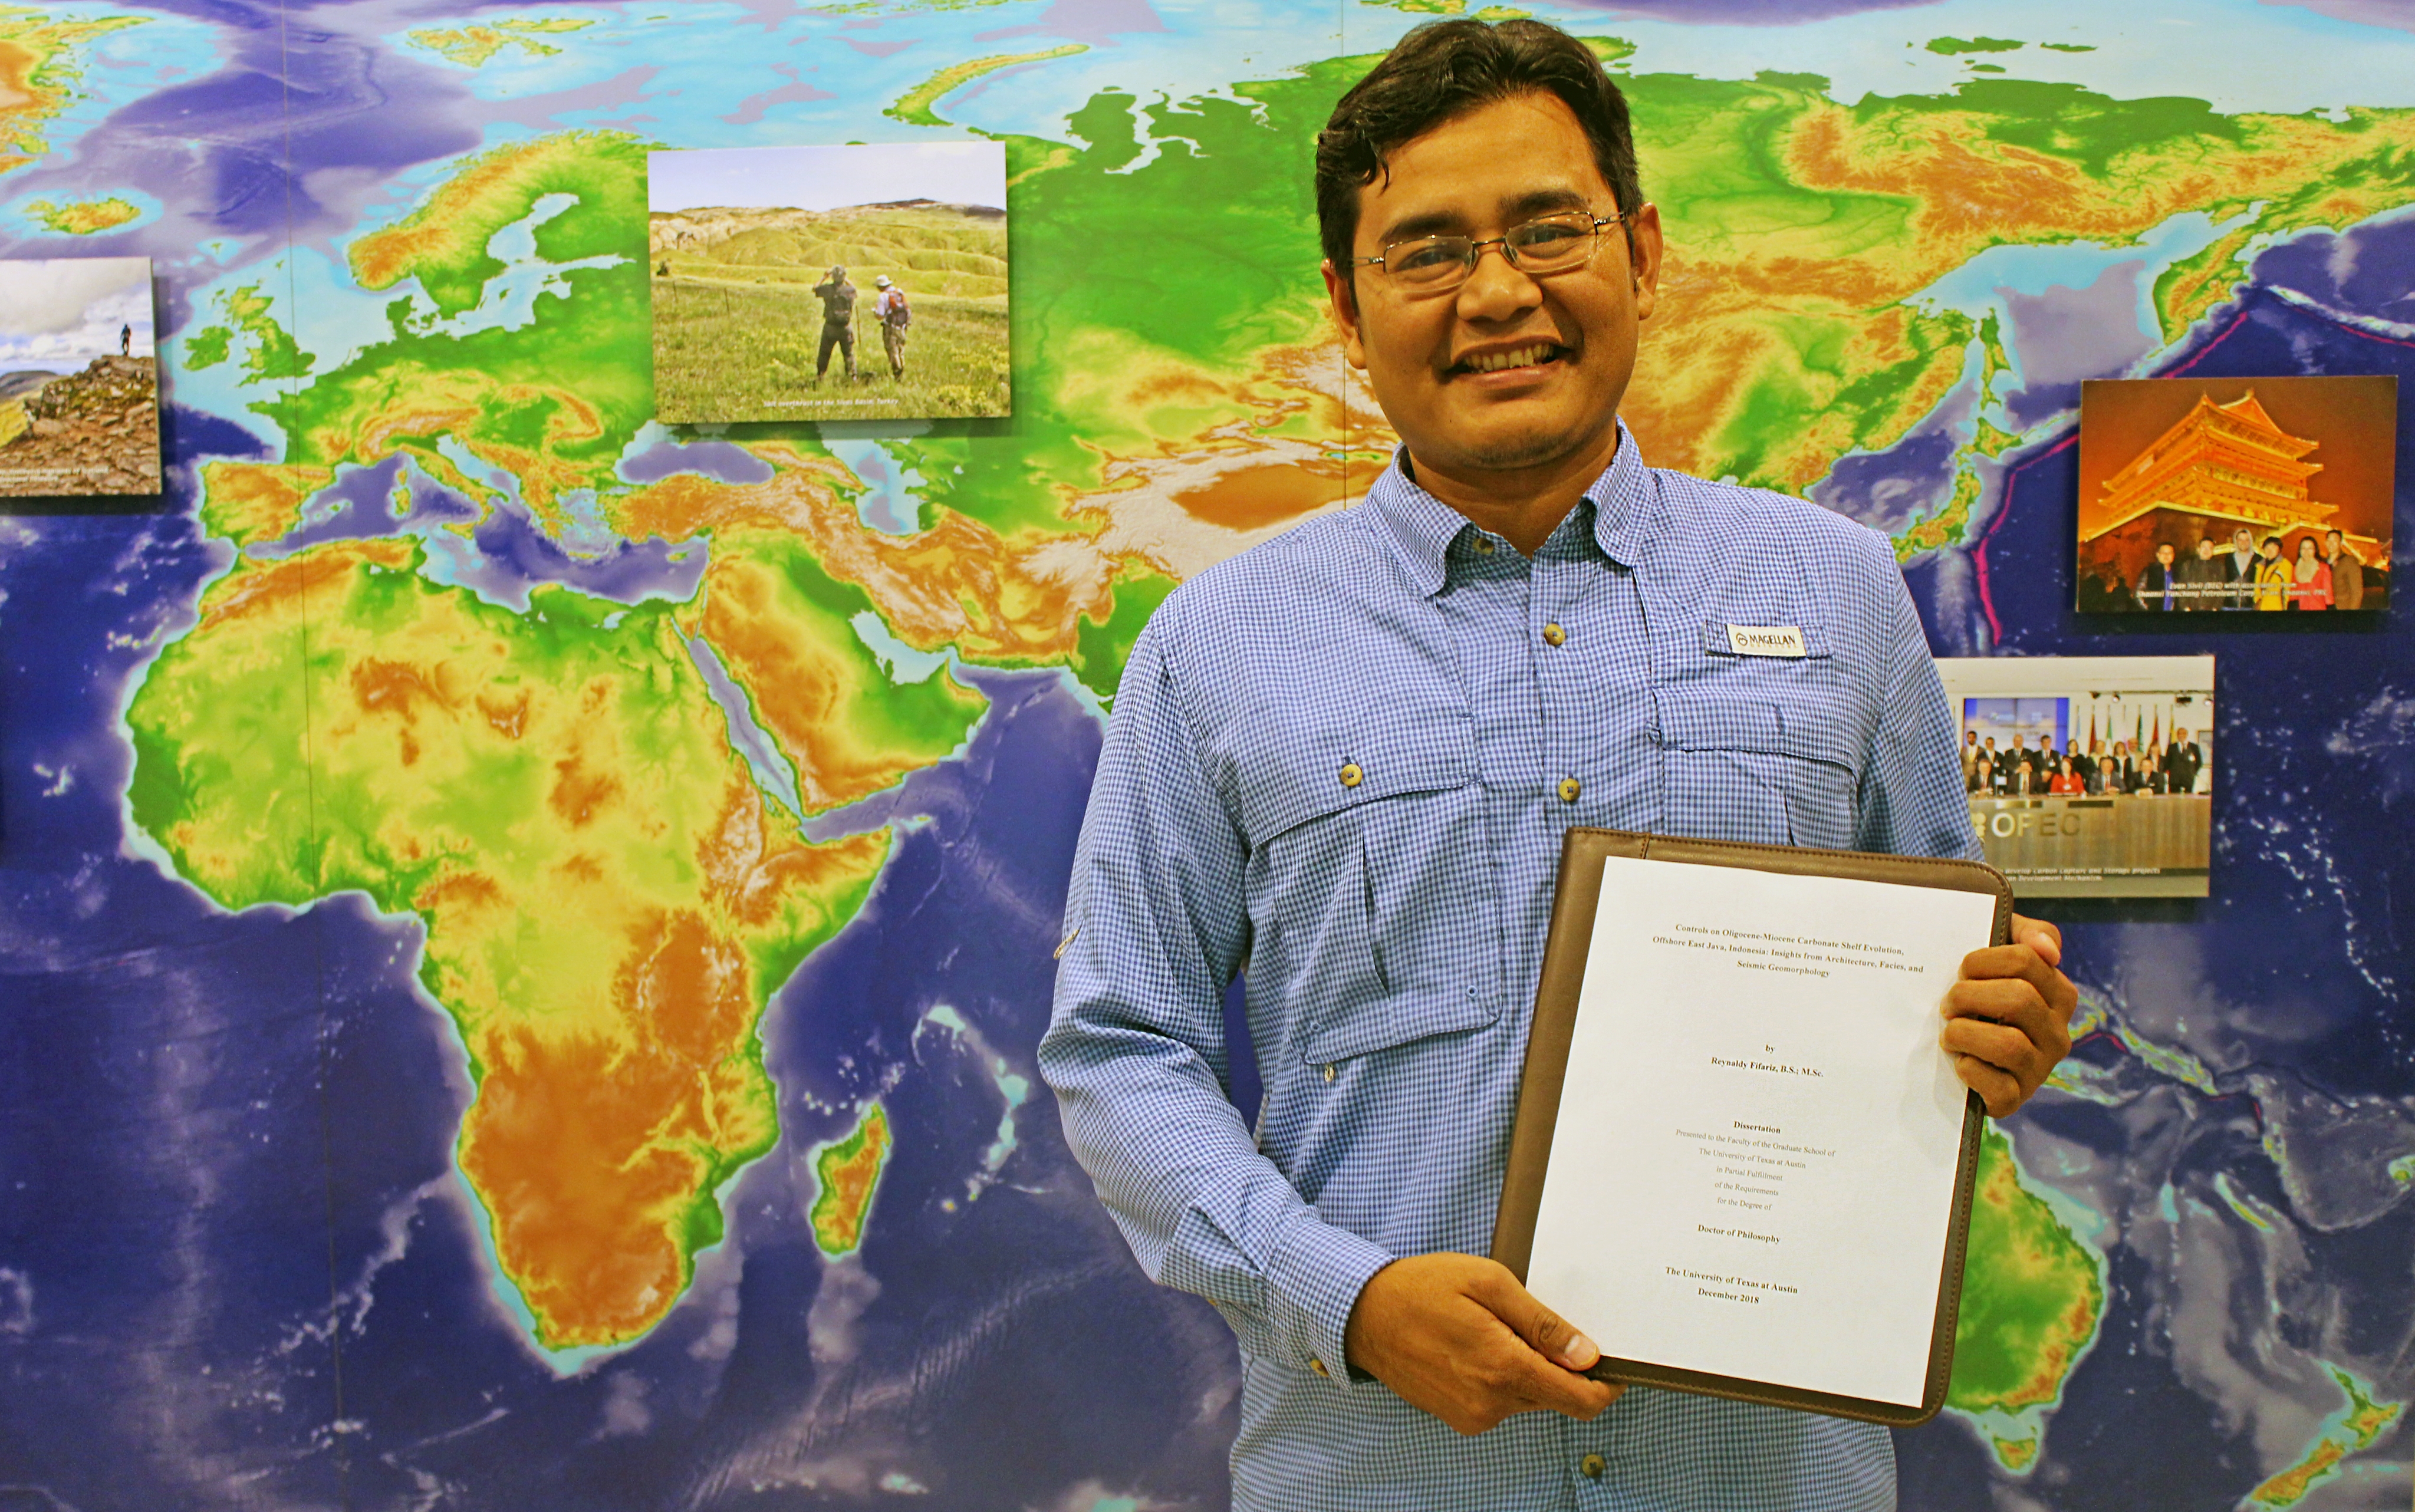 Reynaldy holds his dissertation cover page in front of the Bureau of Economic Geology main hall photo montage